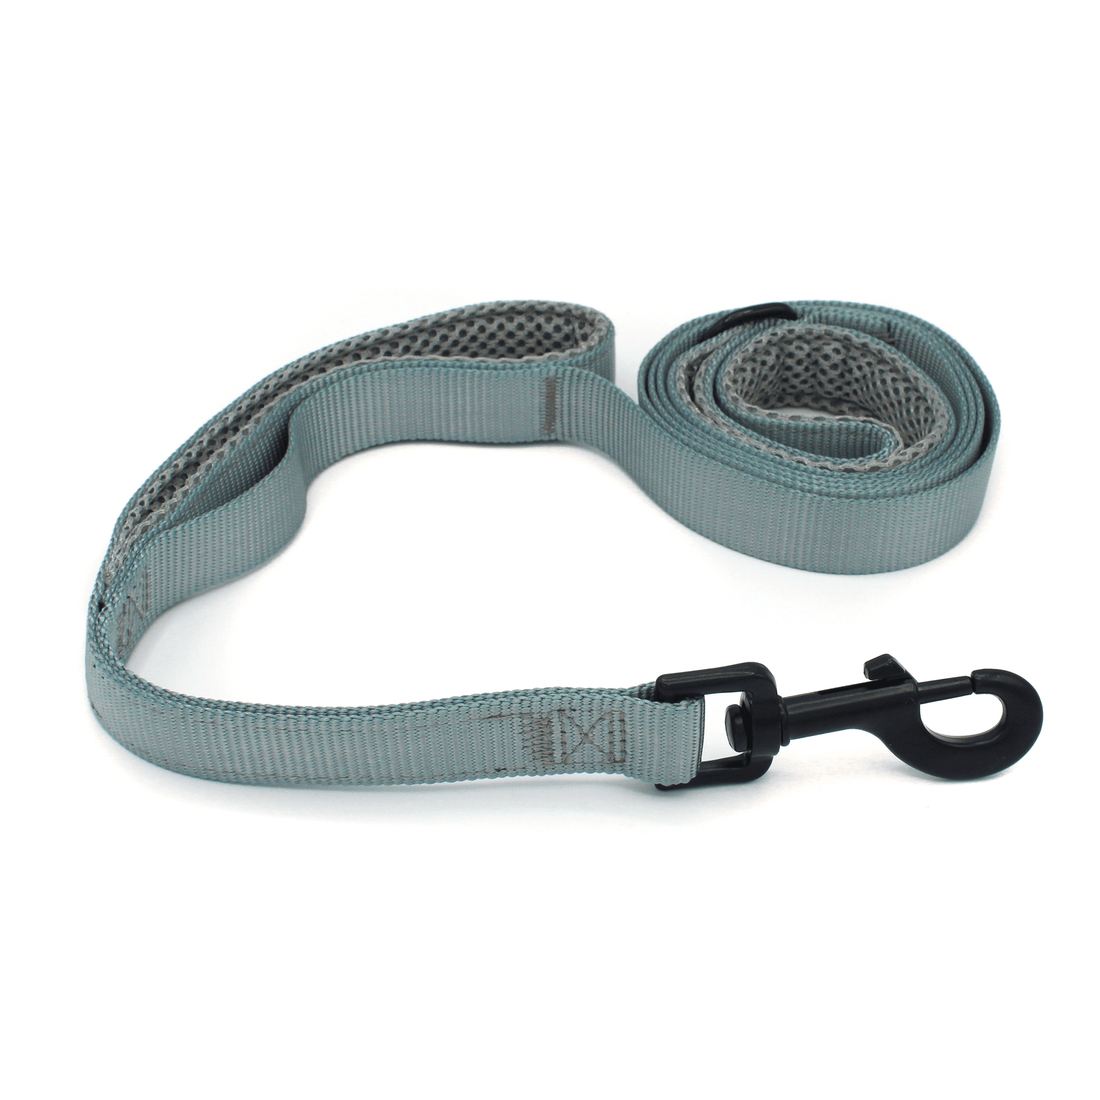 a pewter grey dog leash with black hardware